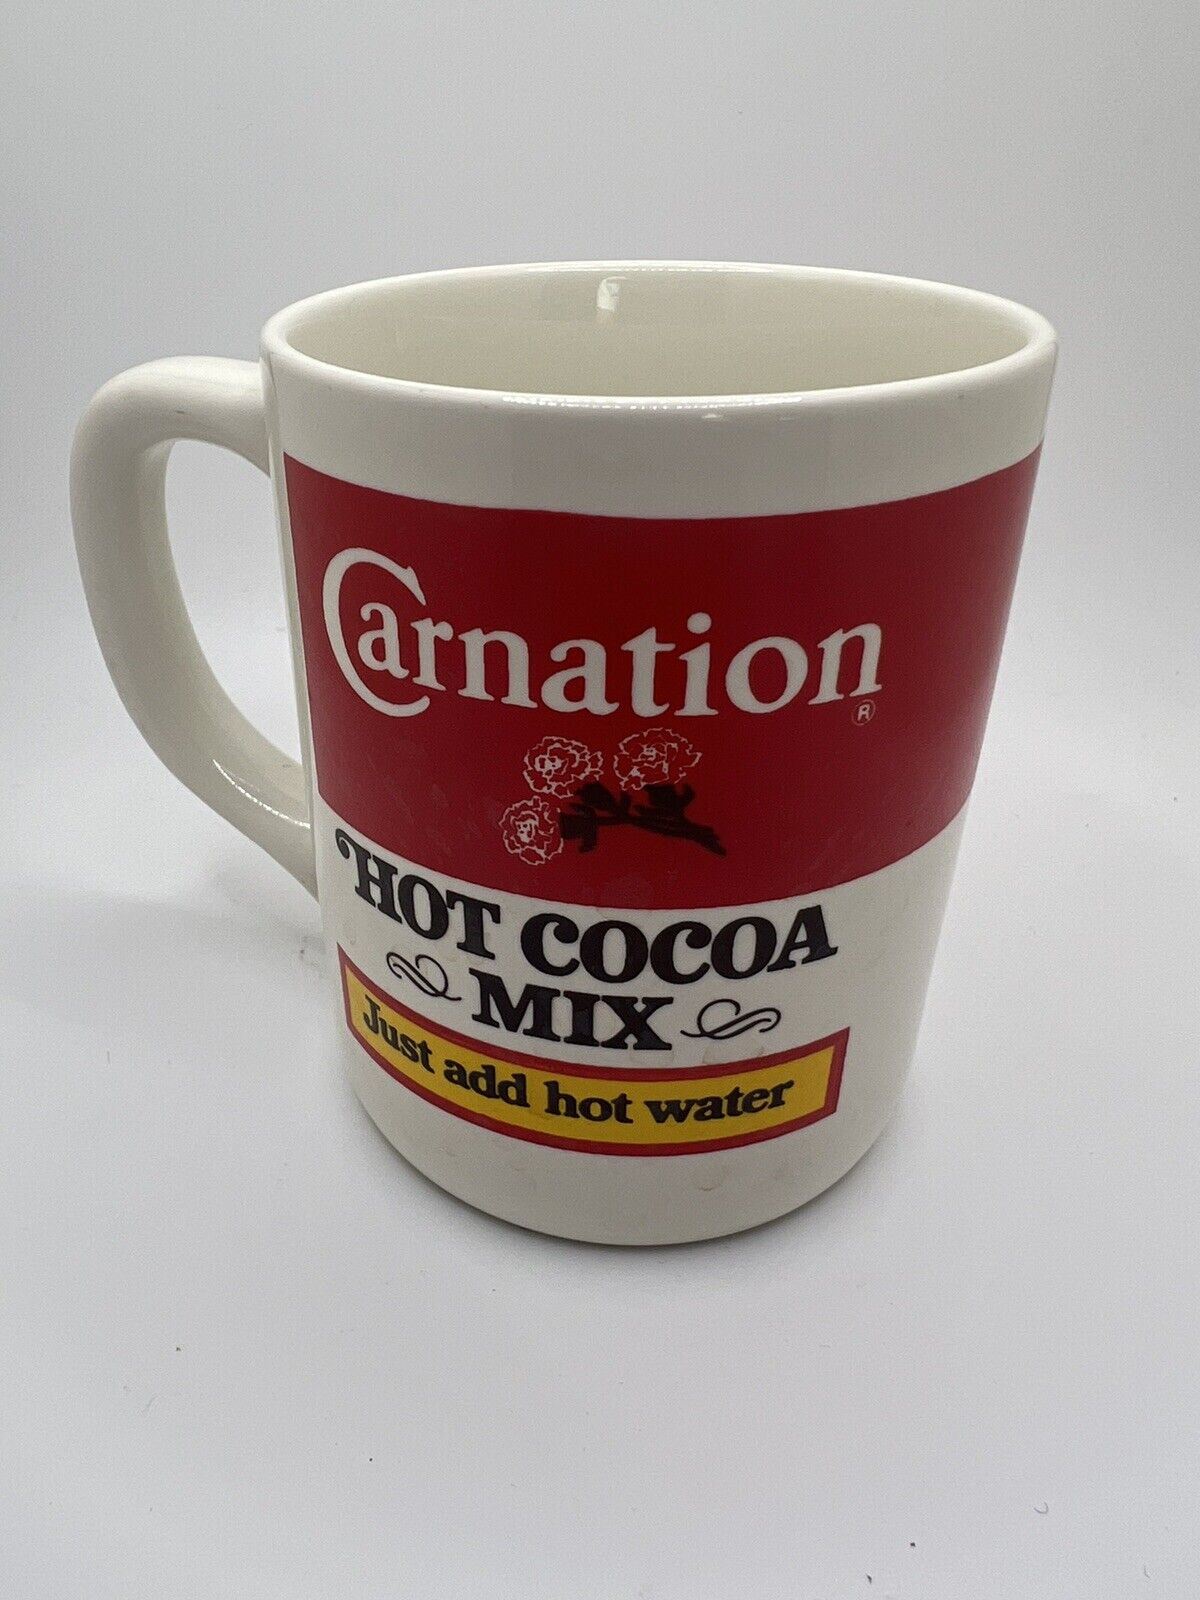 VINTAGE CARNATION HOT COCOA MIX ADVERTISING CERAMIC MUG / COFFEE CUP